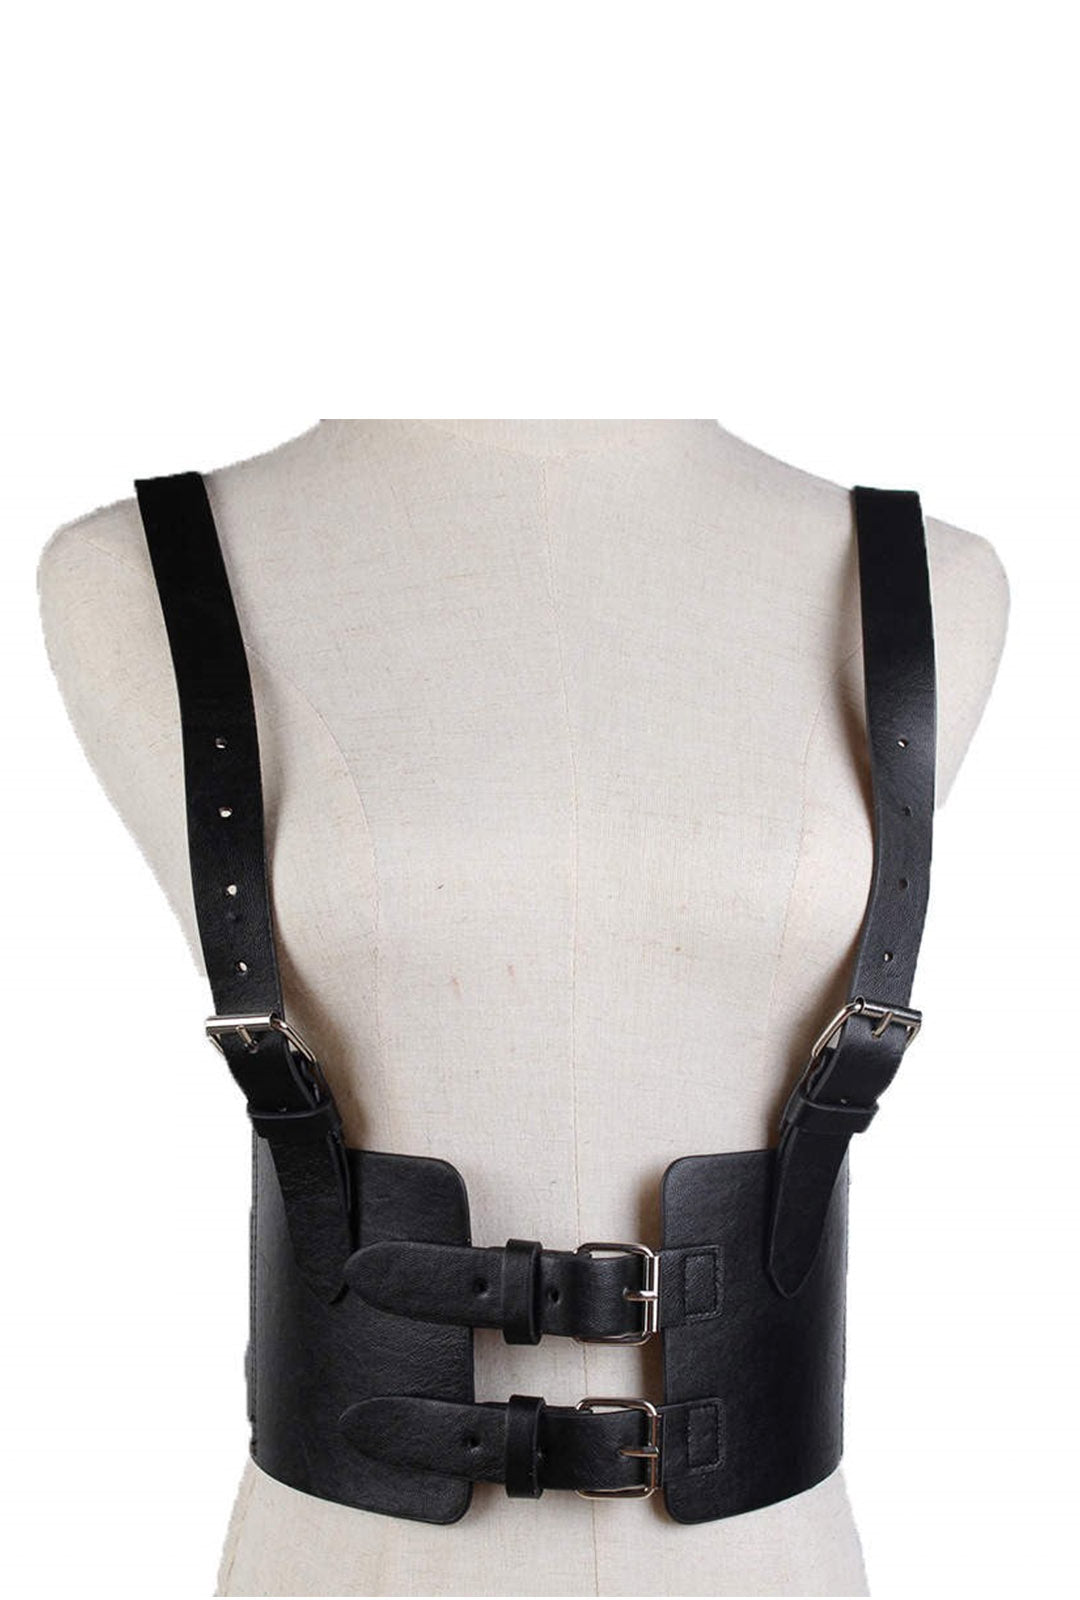 Adjustable PU Leather Chest Harness